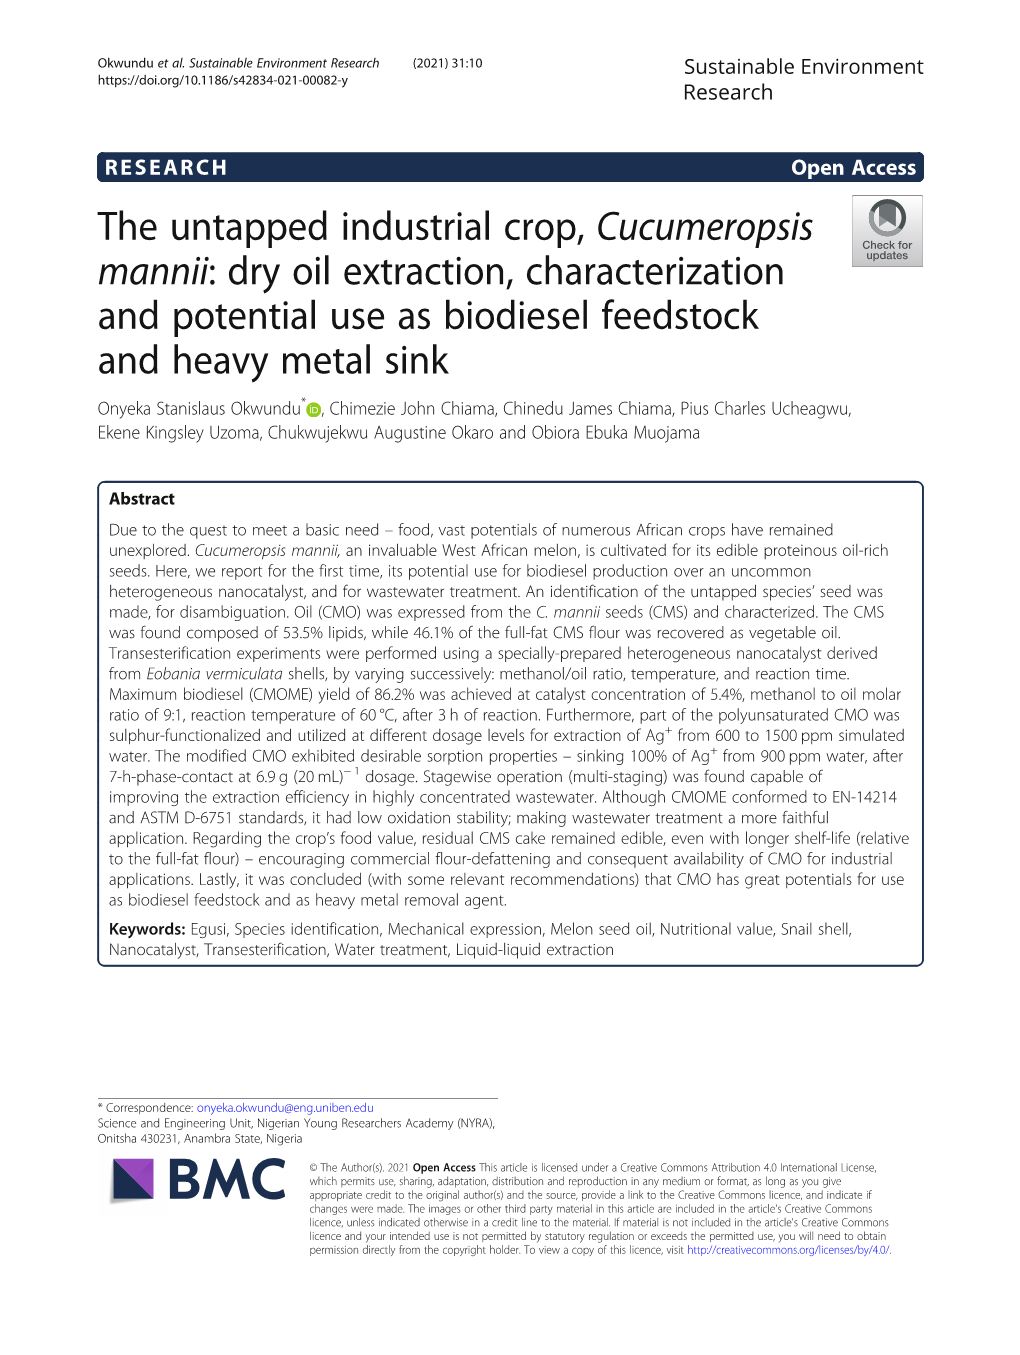 The Untapped Industrial Crop, Cucumeropsis Mannii: Dry Oil